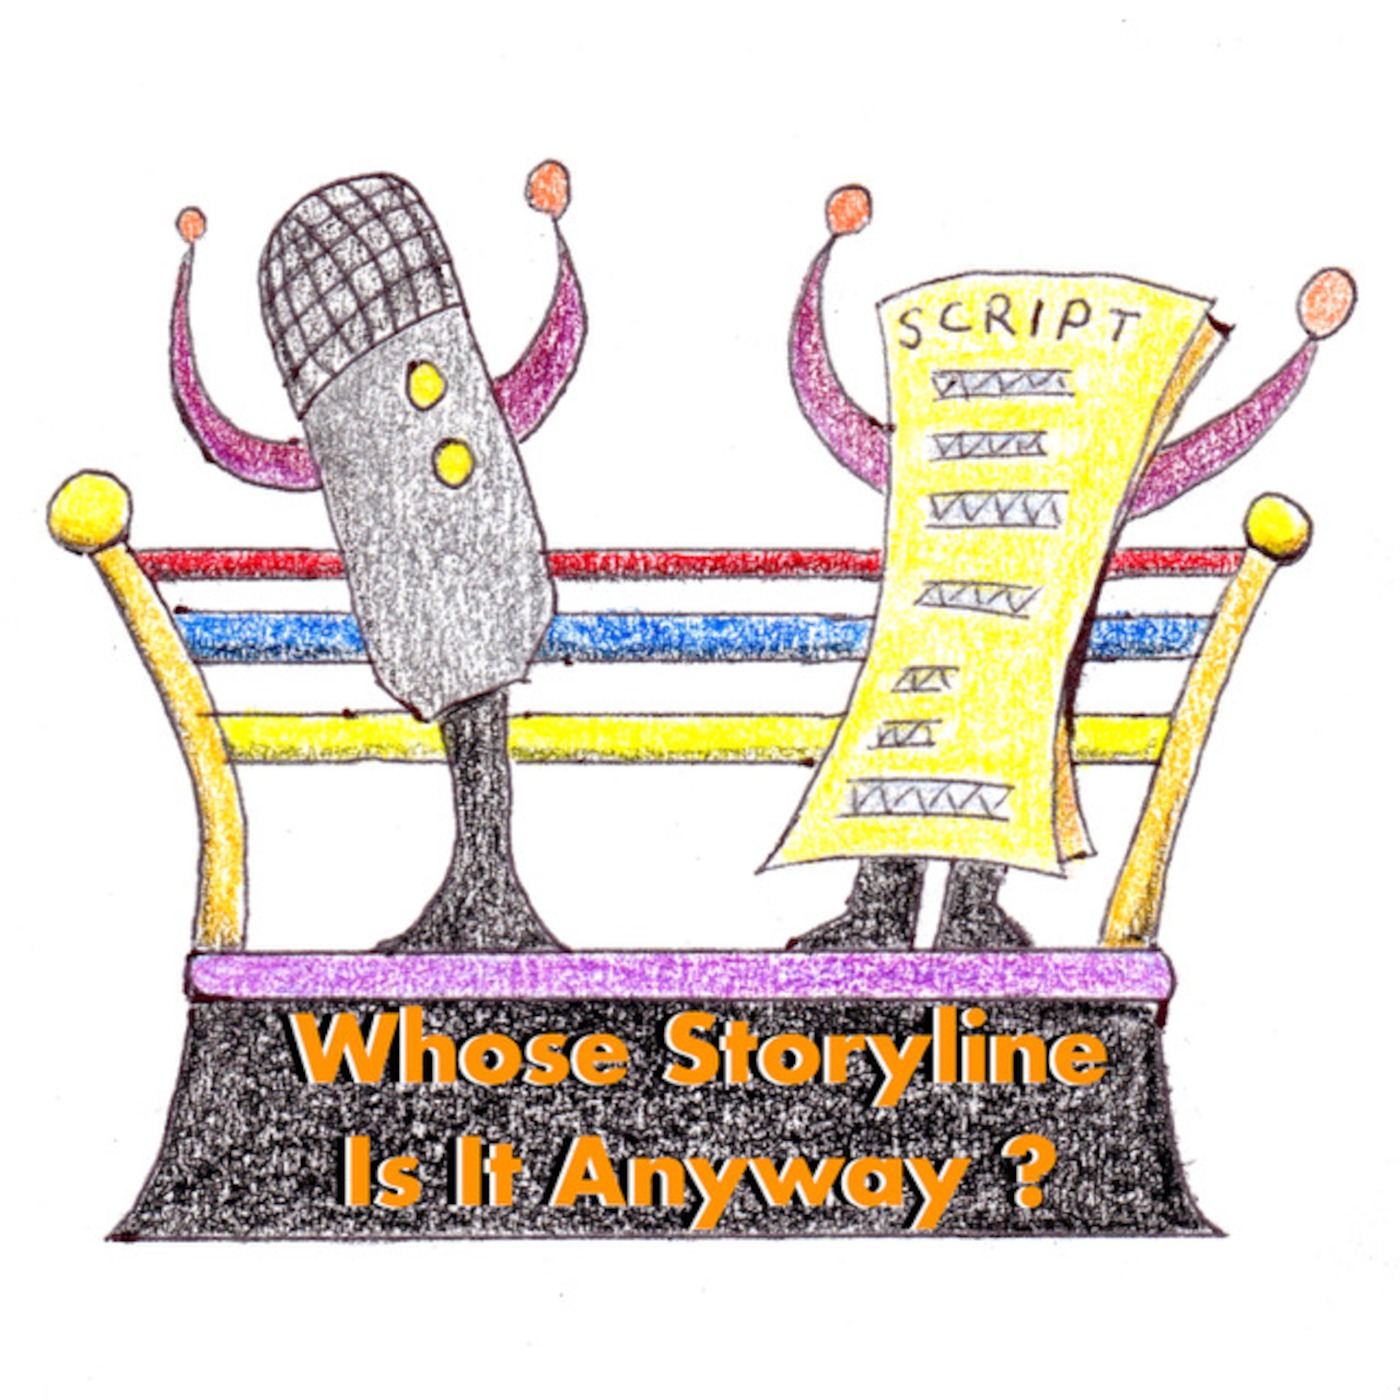 Whose Storyline Is It Anyway?